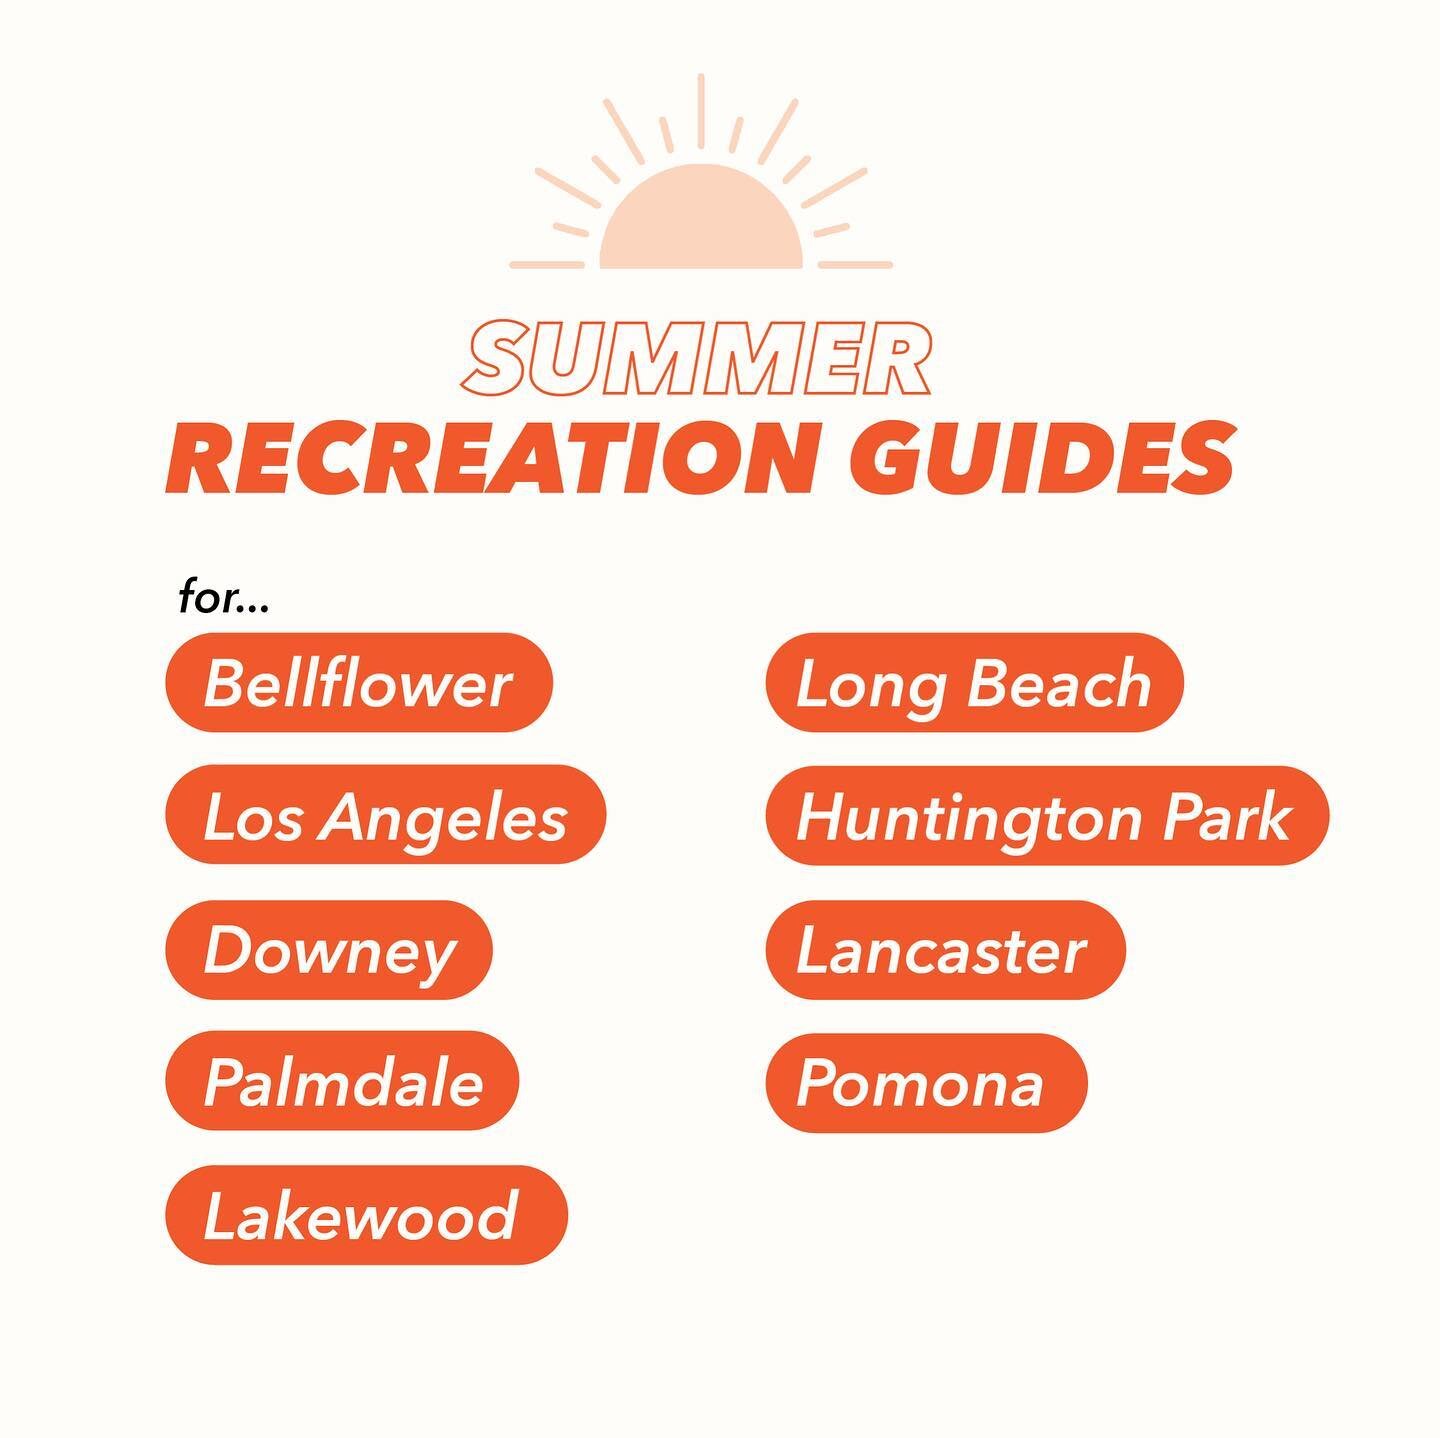 Looking for no/low-cost summer activities? We&rsquo;re sharing some local summer parks &amp; recreation guides in LA County. Free activities range from arts and crafts to soccer and swimming. Click the link in our bio to access the guides!

If you ha